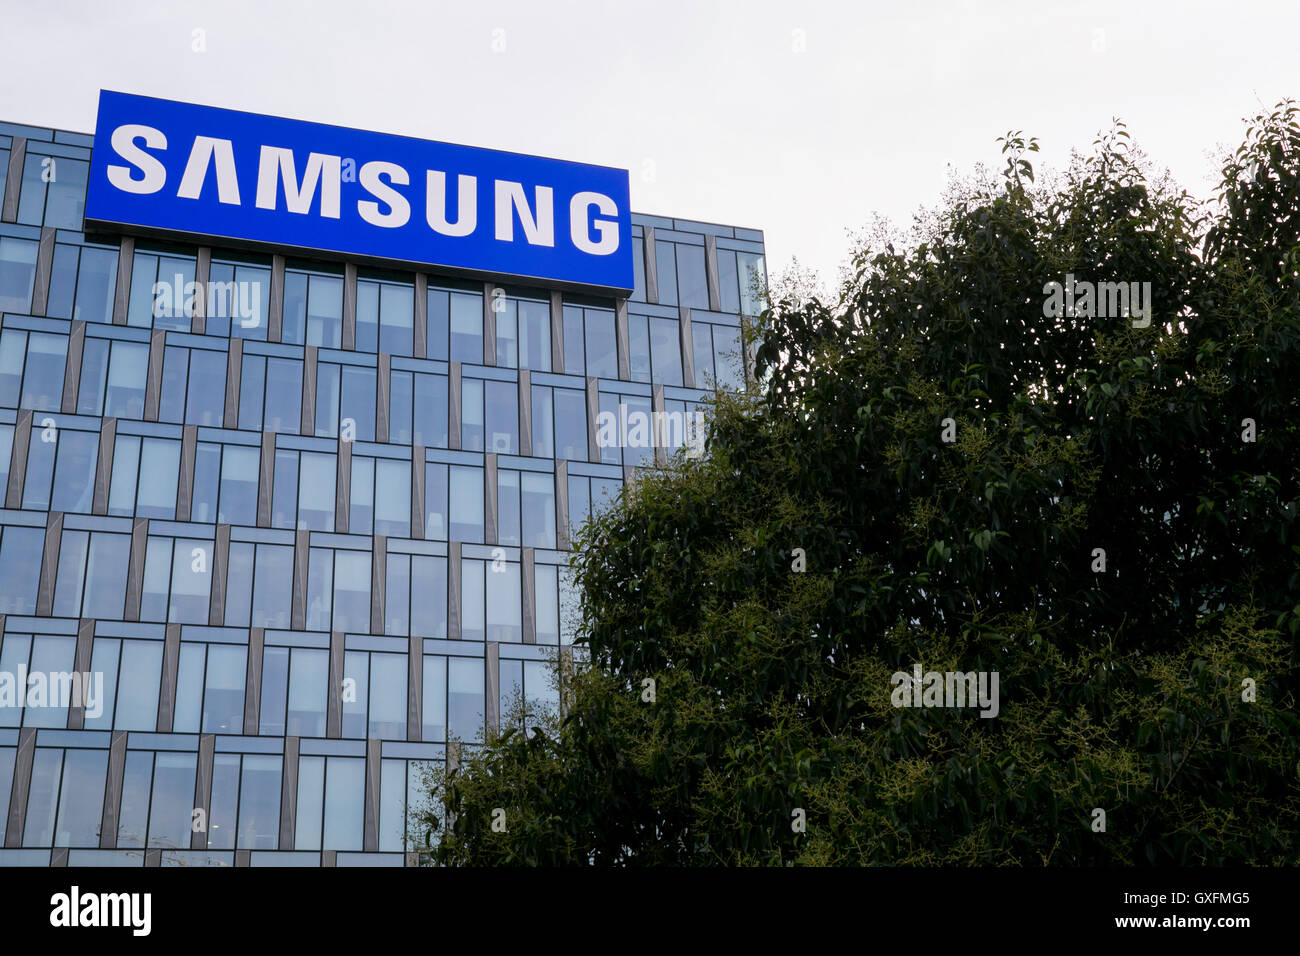 A logo sign outside of a facility occupied by the Samsung Group in Milan, Italy on September 3, 2016. Stock Photo